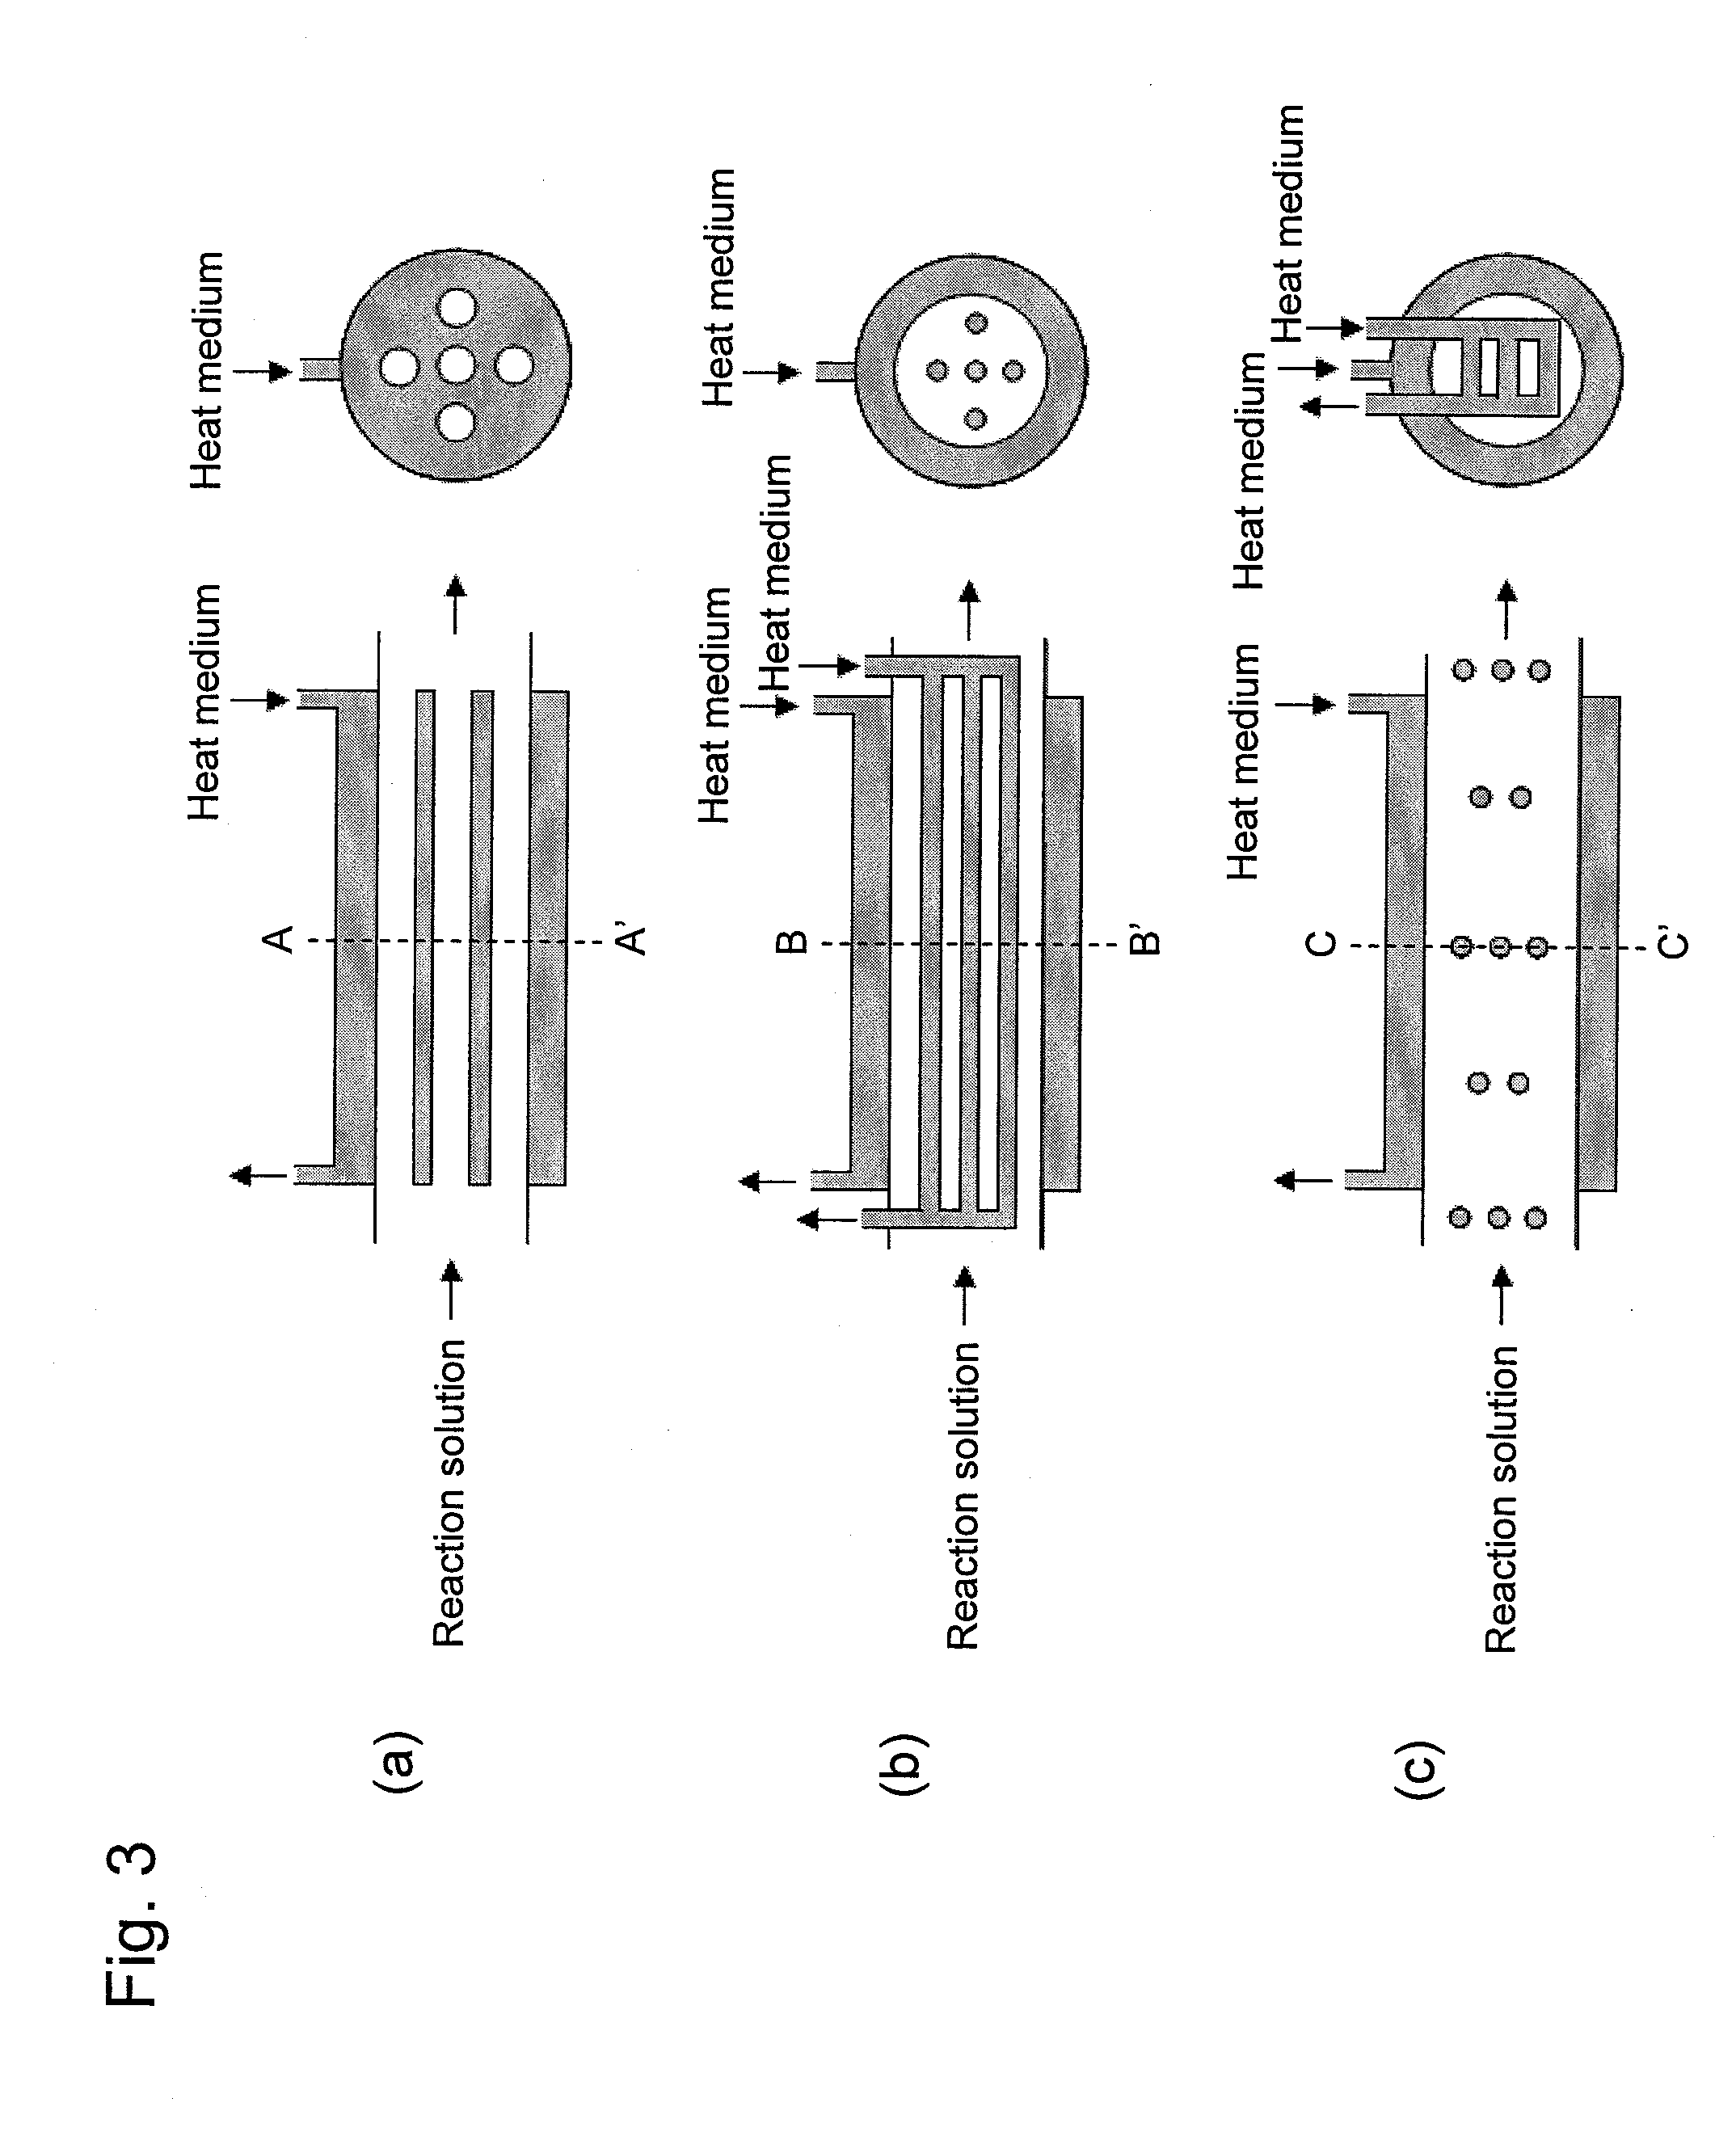 System and method for producing polyhydroxycarboxylic acid